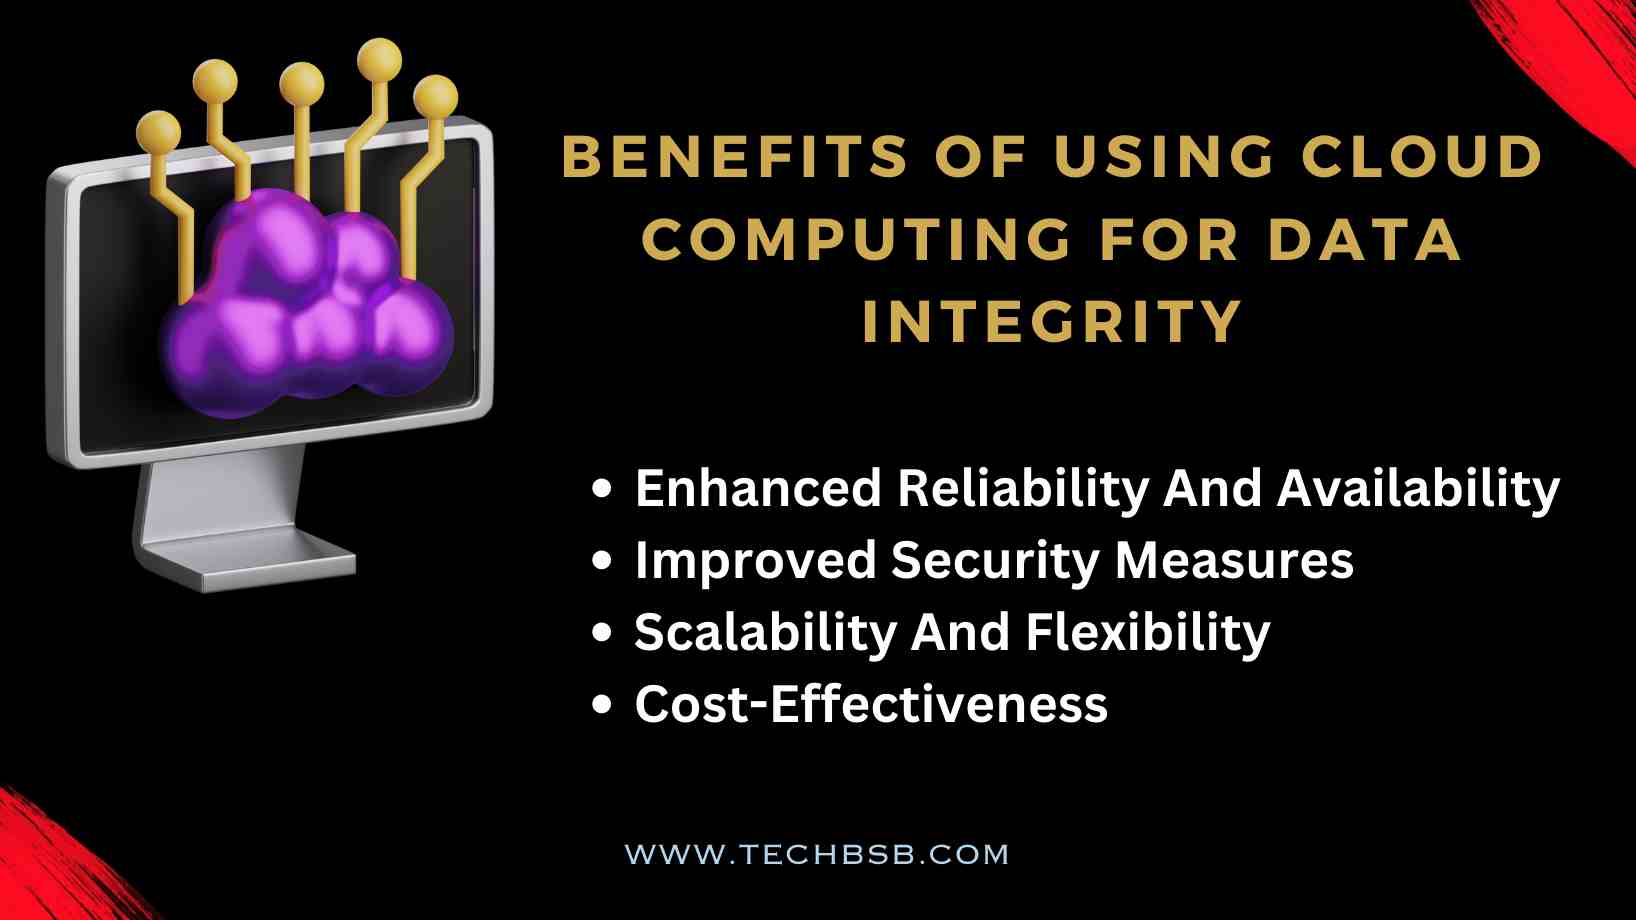 Benefits of Using Cloud Computing for Data Integrity